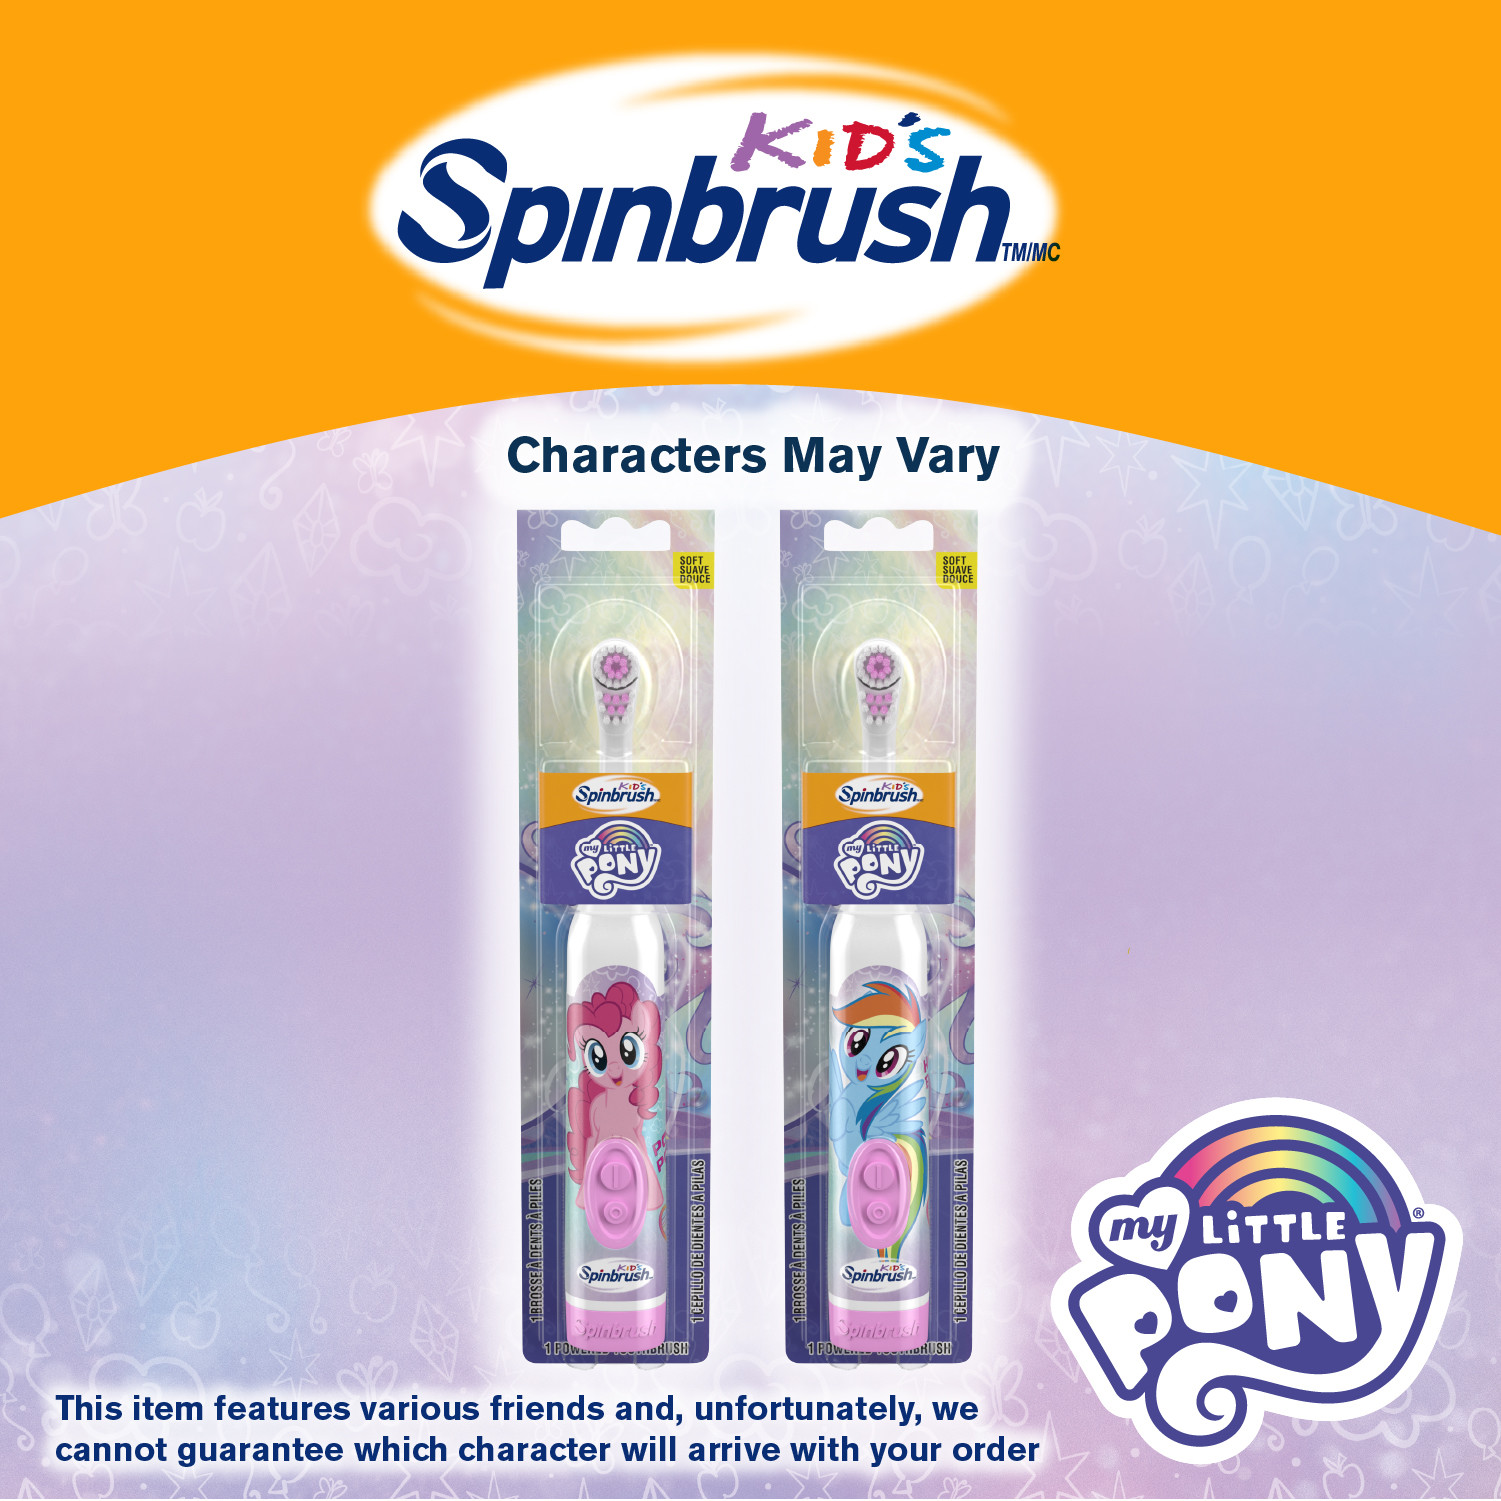 My Little Pony Kid’s Spinbrush Electric Battery Toothbrush, Soft, 1 ct, Character May Vary - image 4 of 7